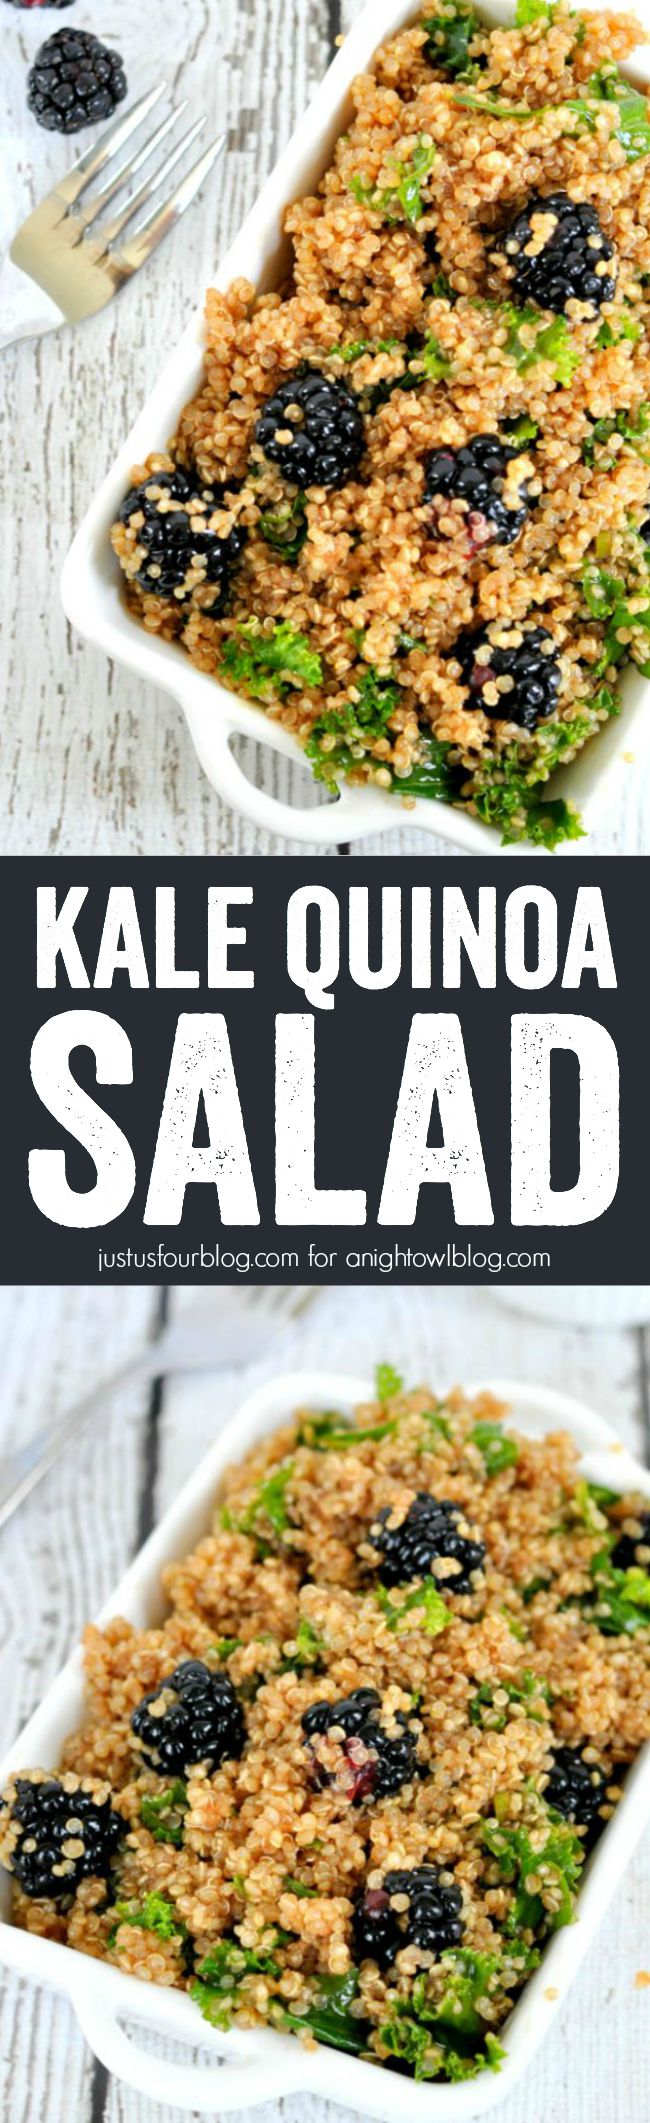 Kale Quinoa Salad is perfect for a summer dinner or lunch. Top it with fresh blackberries for a little added sweetness.